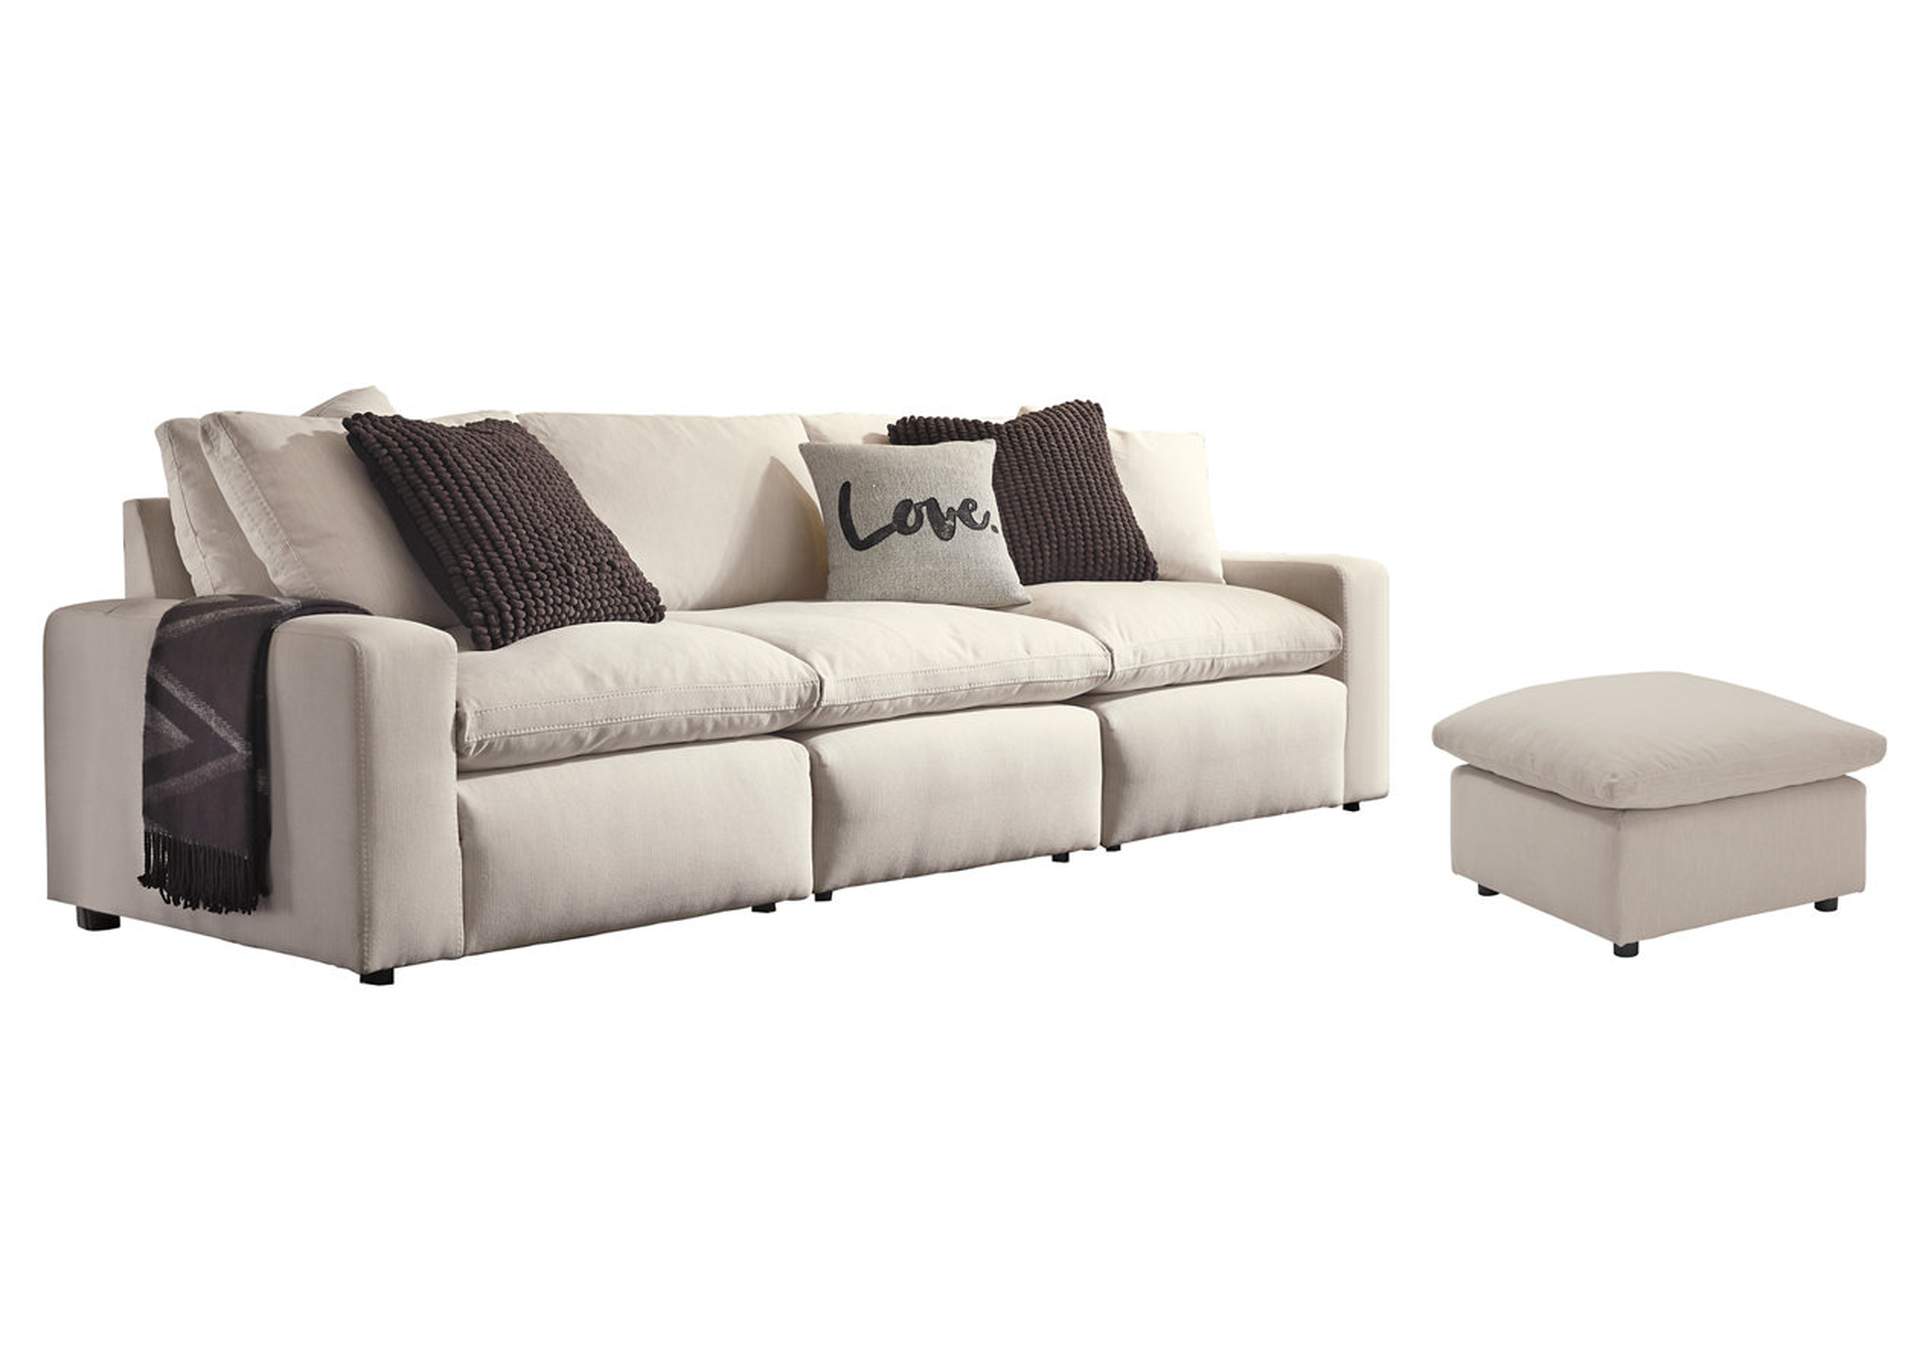 Savesto 3-Piece Sectional with Ottoman,Signature Design By Ashley